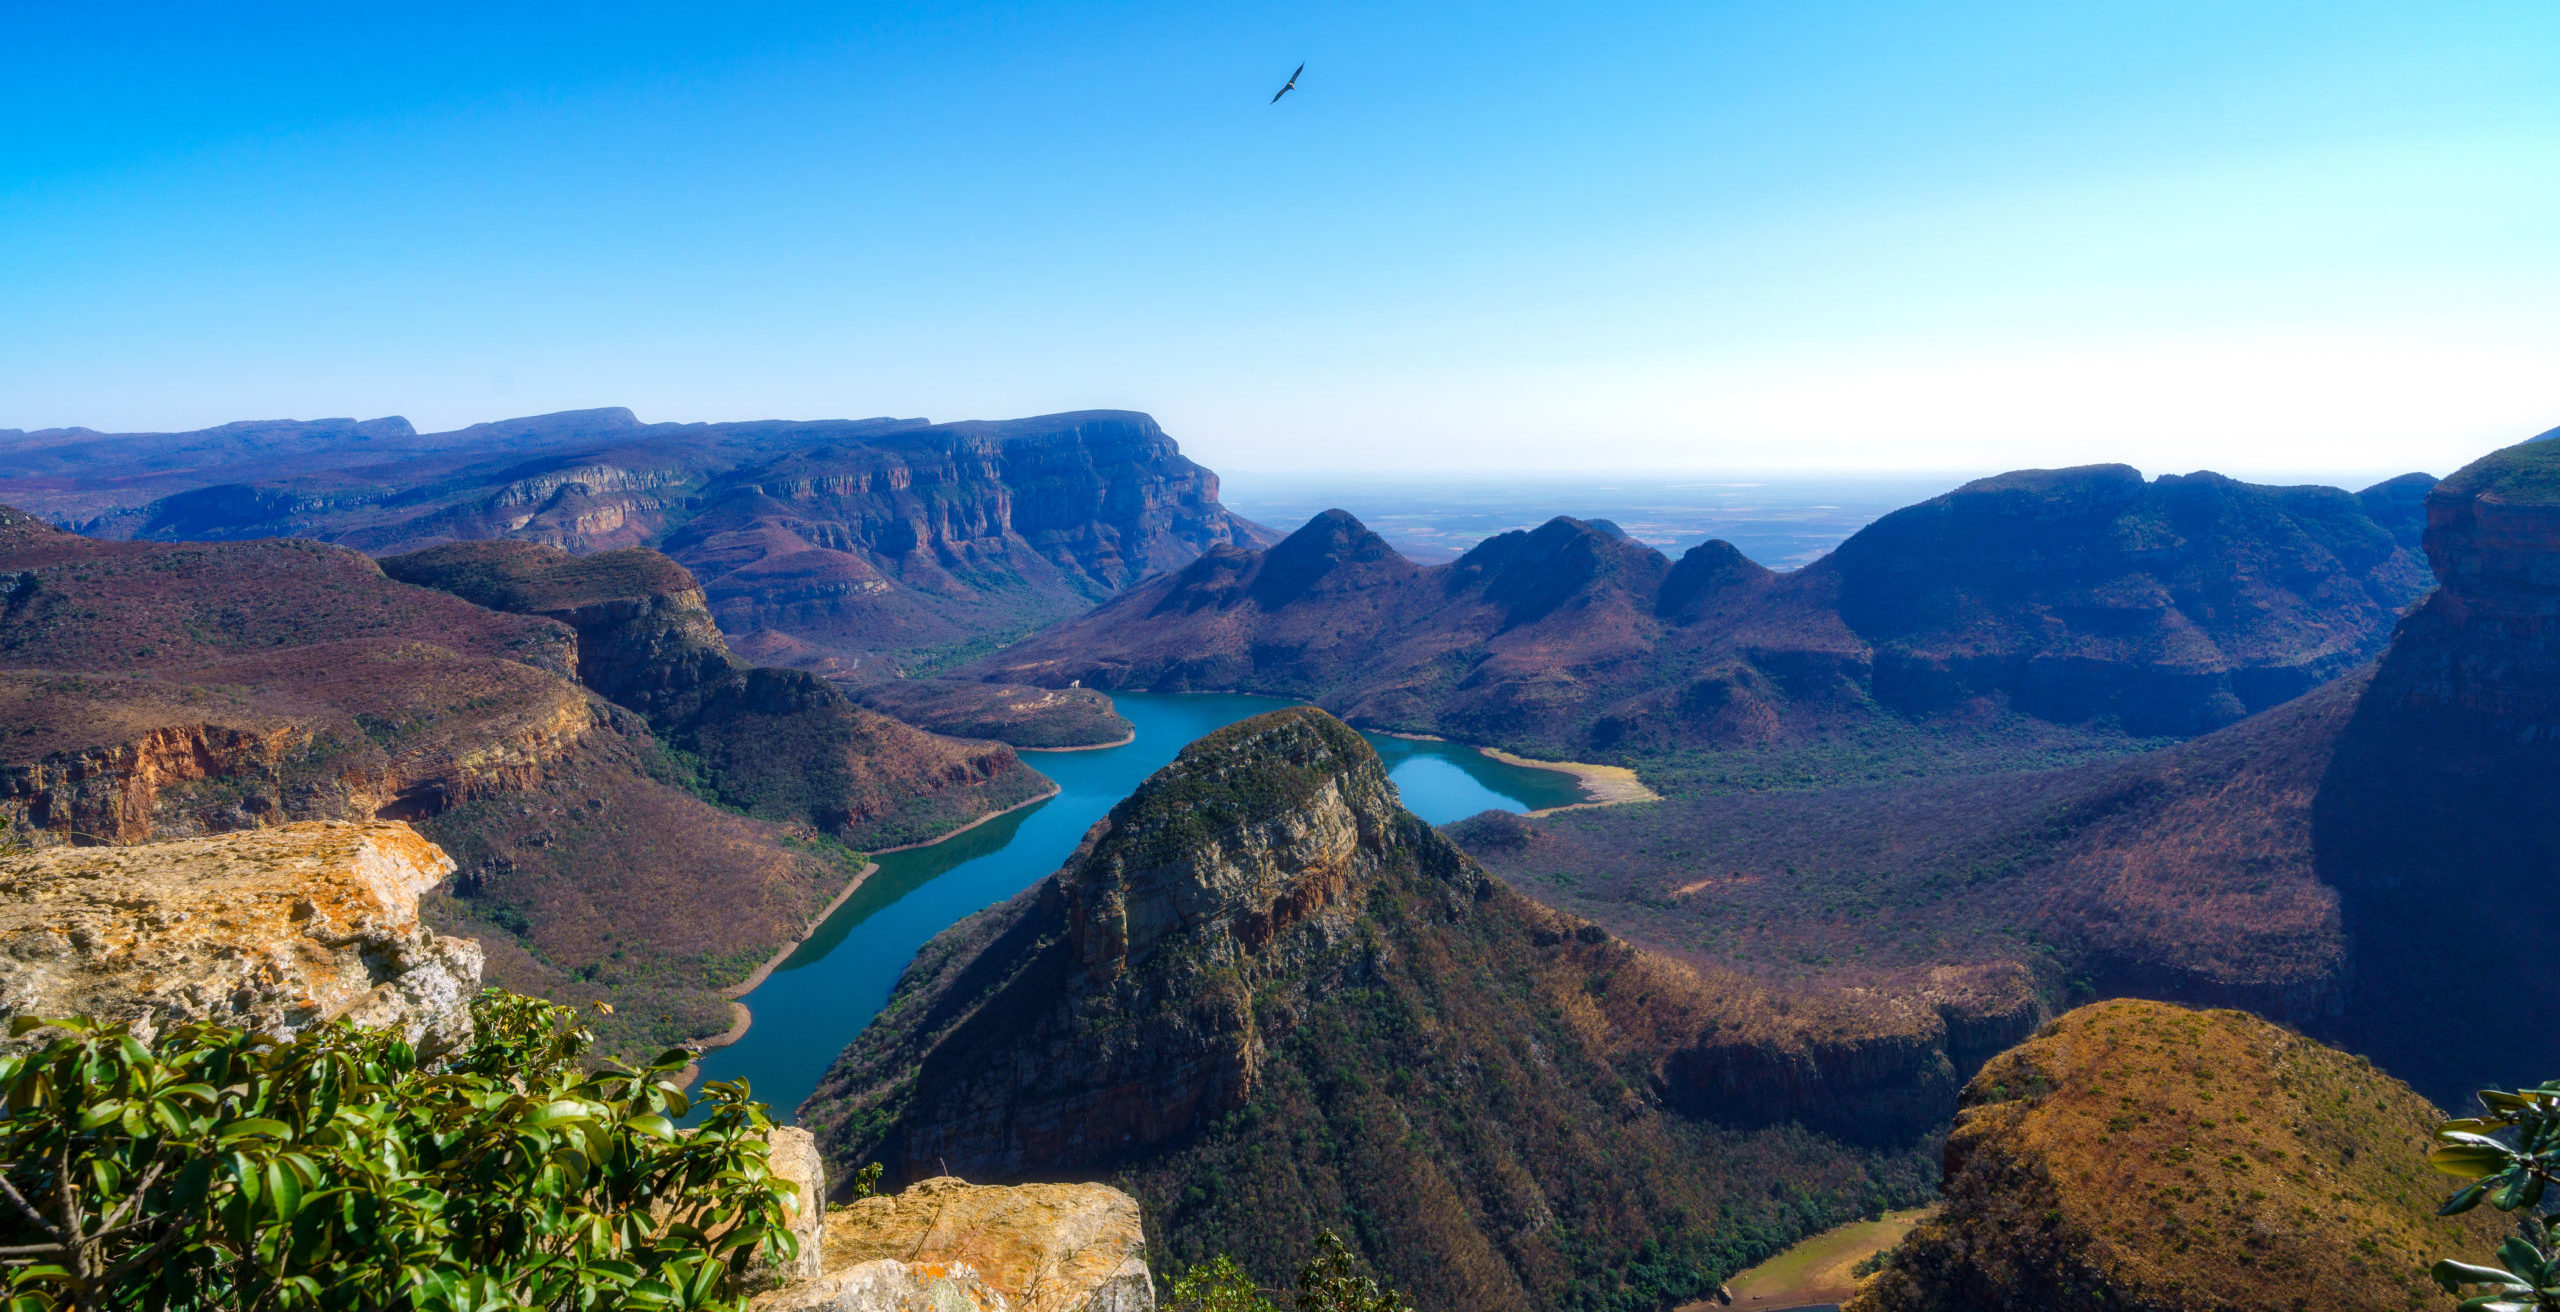 Experience extraordinary landscape like the Blyde River Canyon on the Panorama Route, South Africa, when you take a tailor-made holiday with Alfred&.